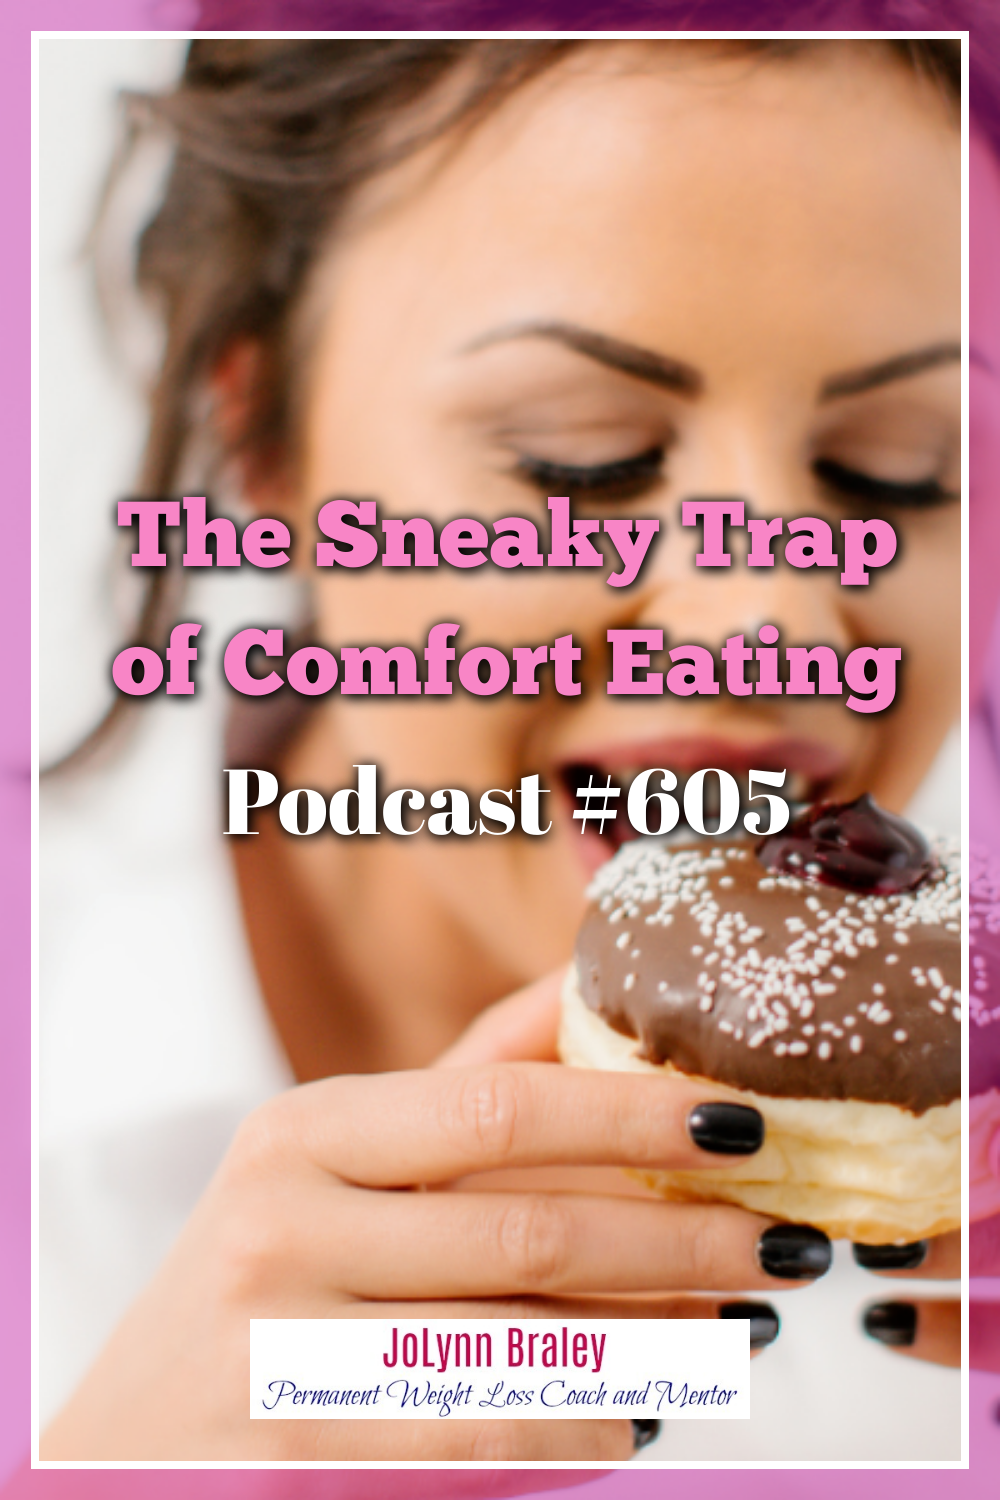 The Sneaky Trap of Comfort Eating [Podcast #605]